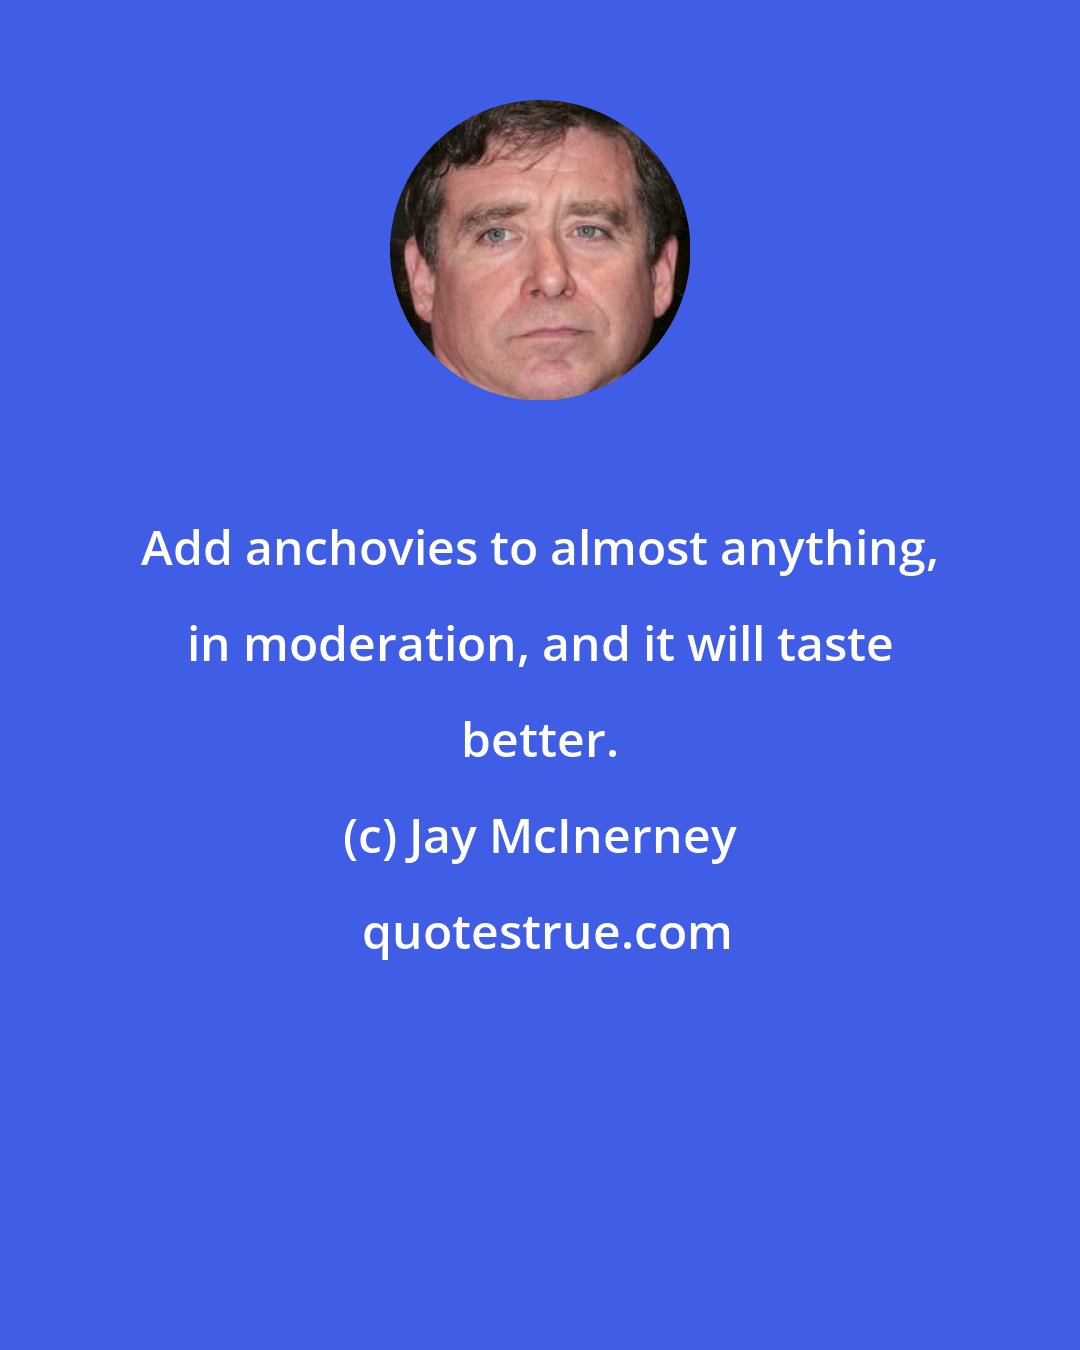 Jay McInerney: Add anchovies to almost anything, in moderation, and it will taste better.